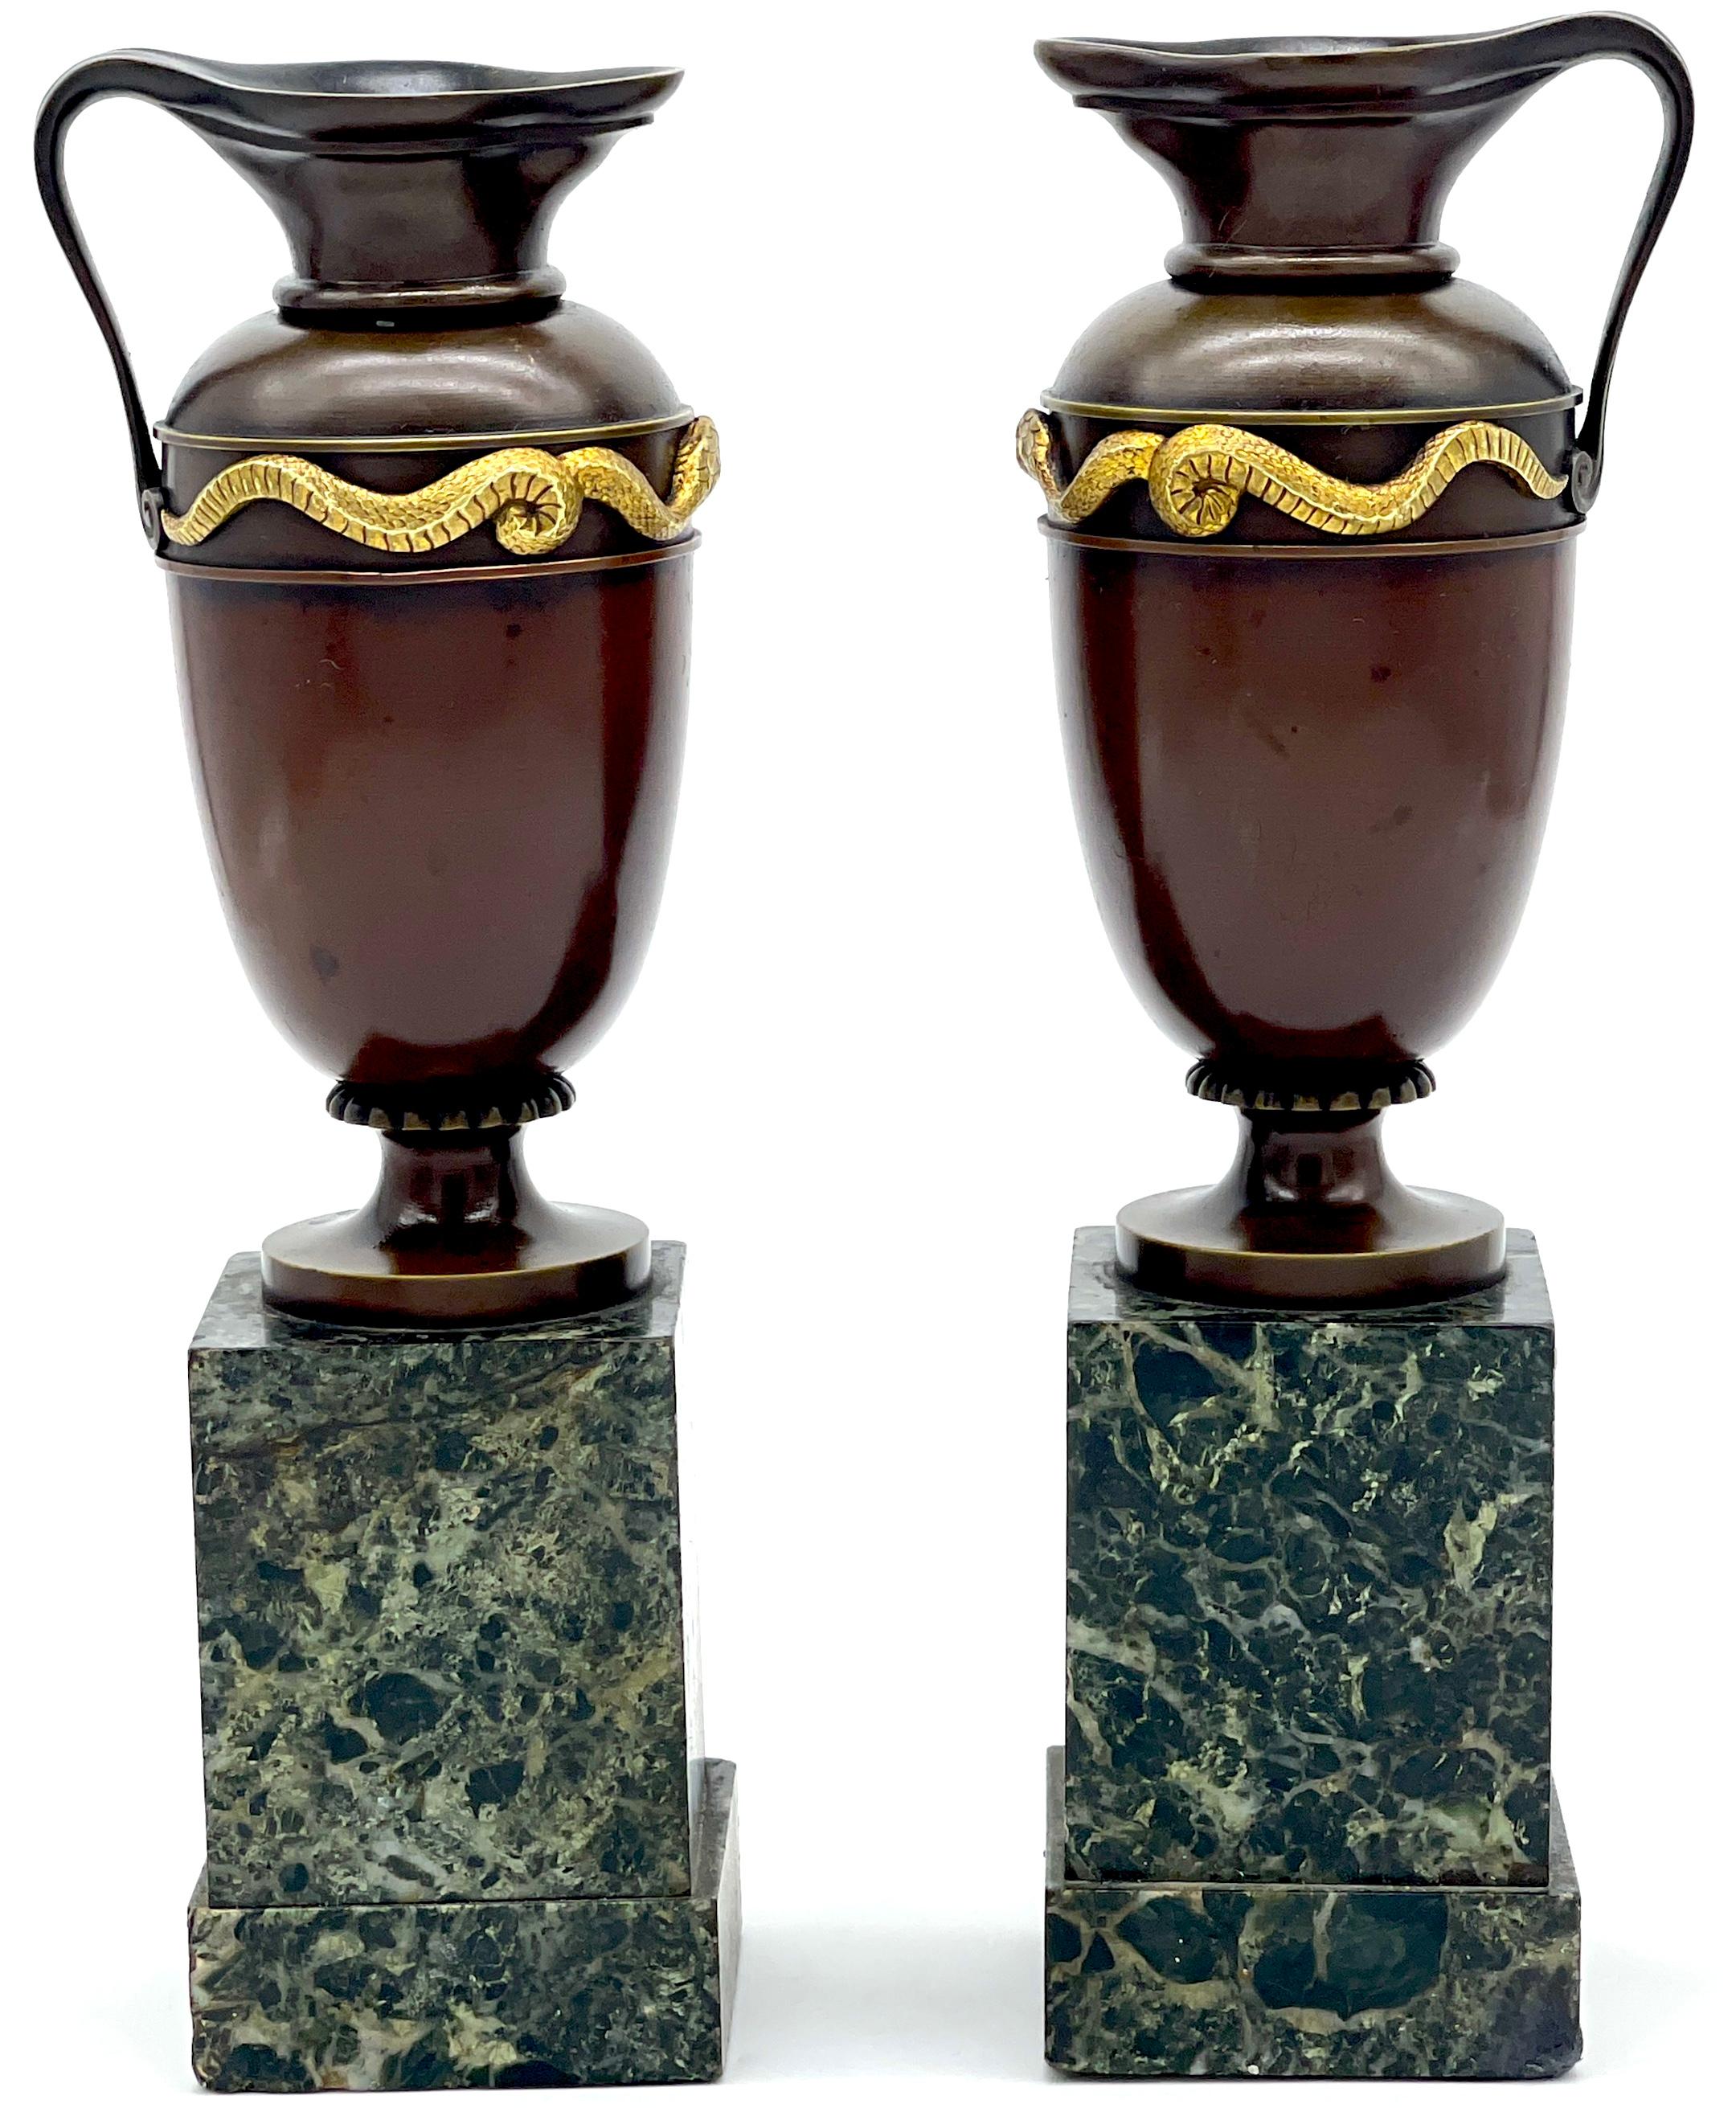 Pair of Roman Grand Tour Bronze and Ormolu Serpent Motif Vases/ Ewers/Urns 
Italy, circa 1880s

A beautiful pair of Roman Grand Tour Bronze and Ormolu Serpent Motif Vases, Ewers, and Urns, originating from Italy in the 1880s. Each piece stands at